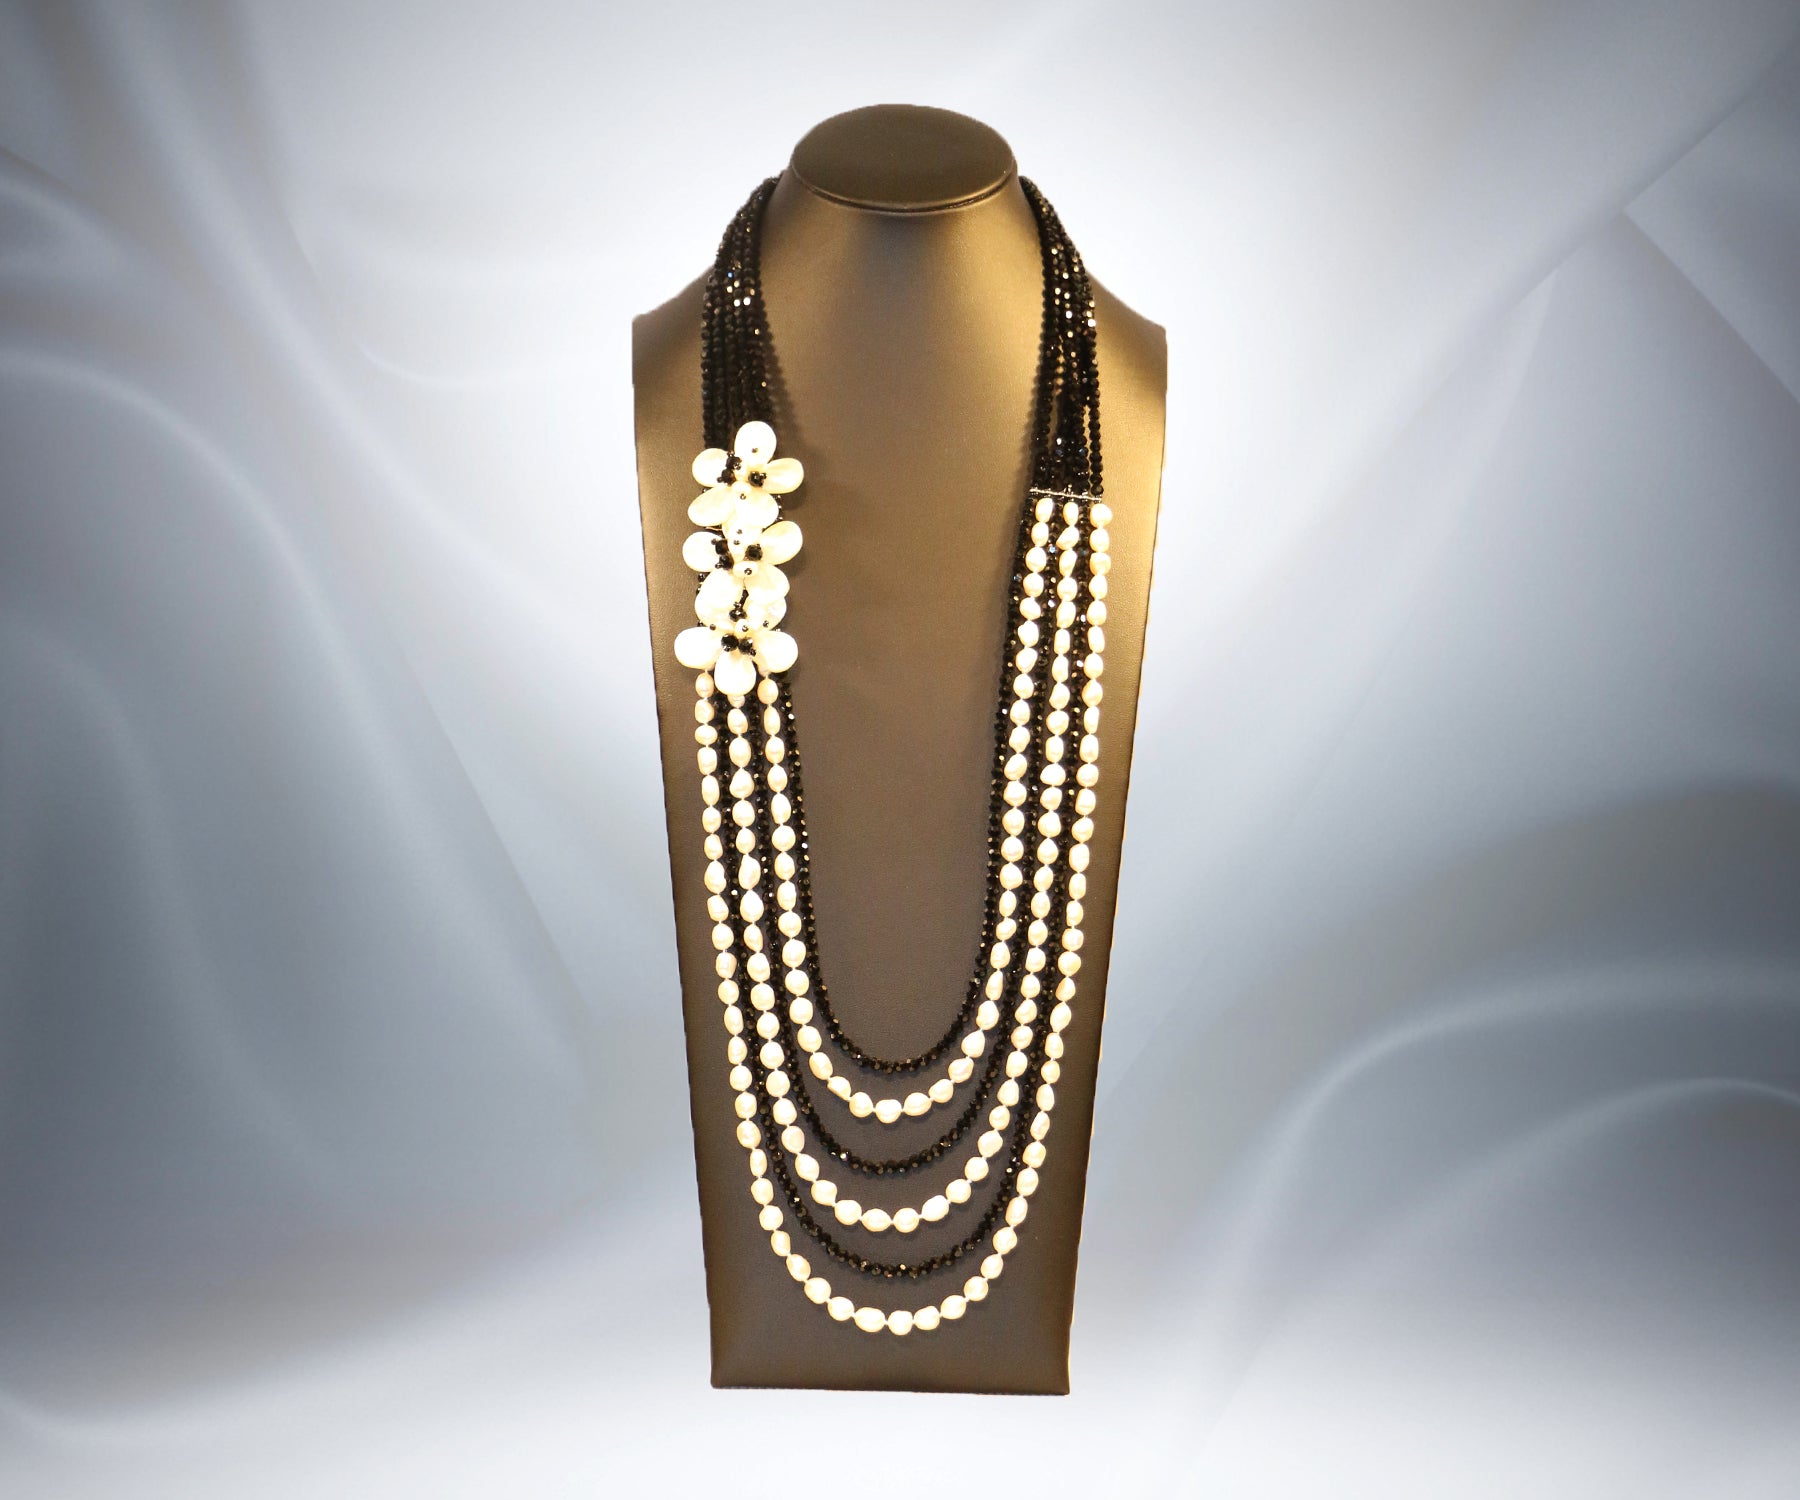 Necklace with White Pearl and Black Onyx Discs - Bronzallure